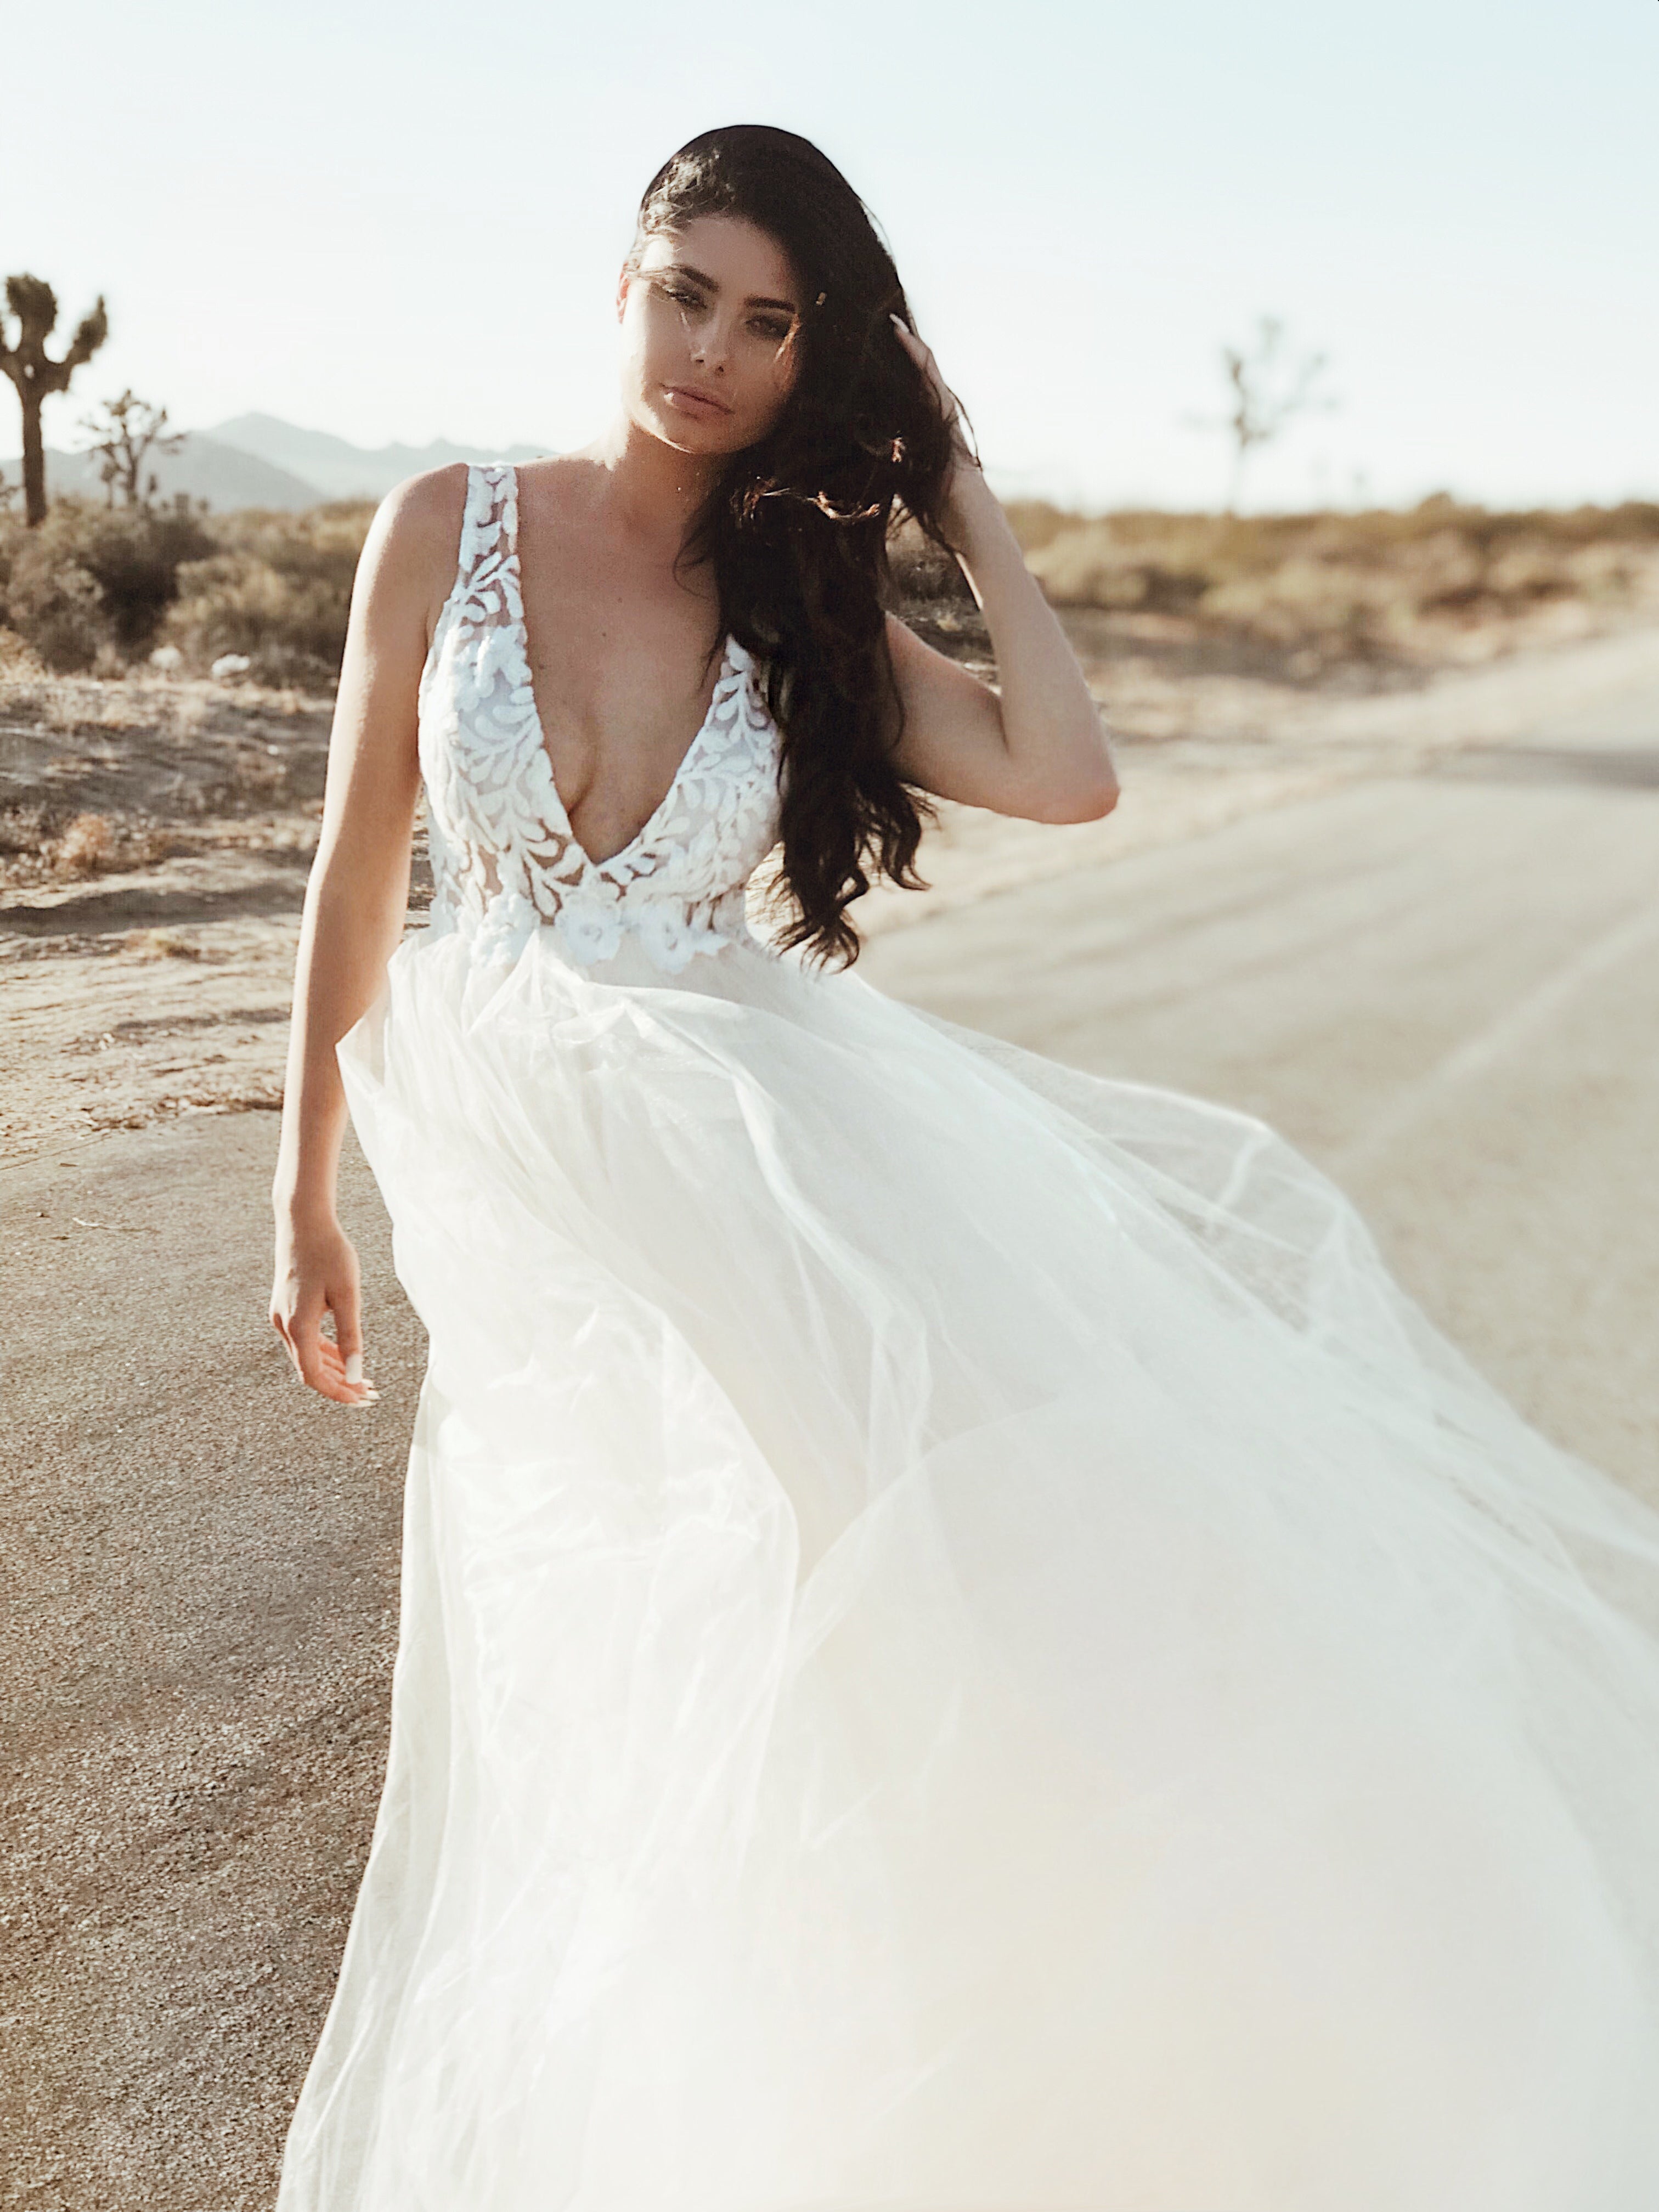 V-neck illusion sequin ball gown wedding dress by Lauren Elaine Los Angeles